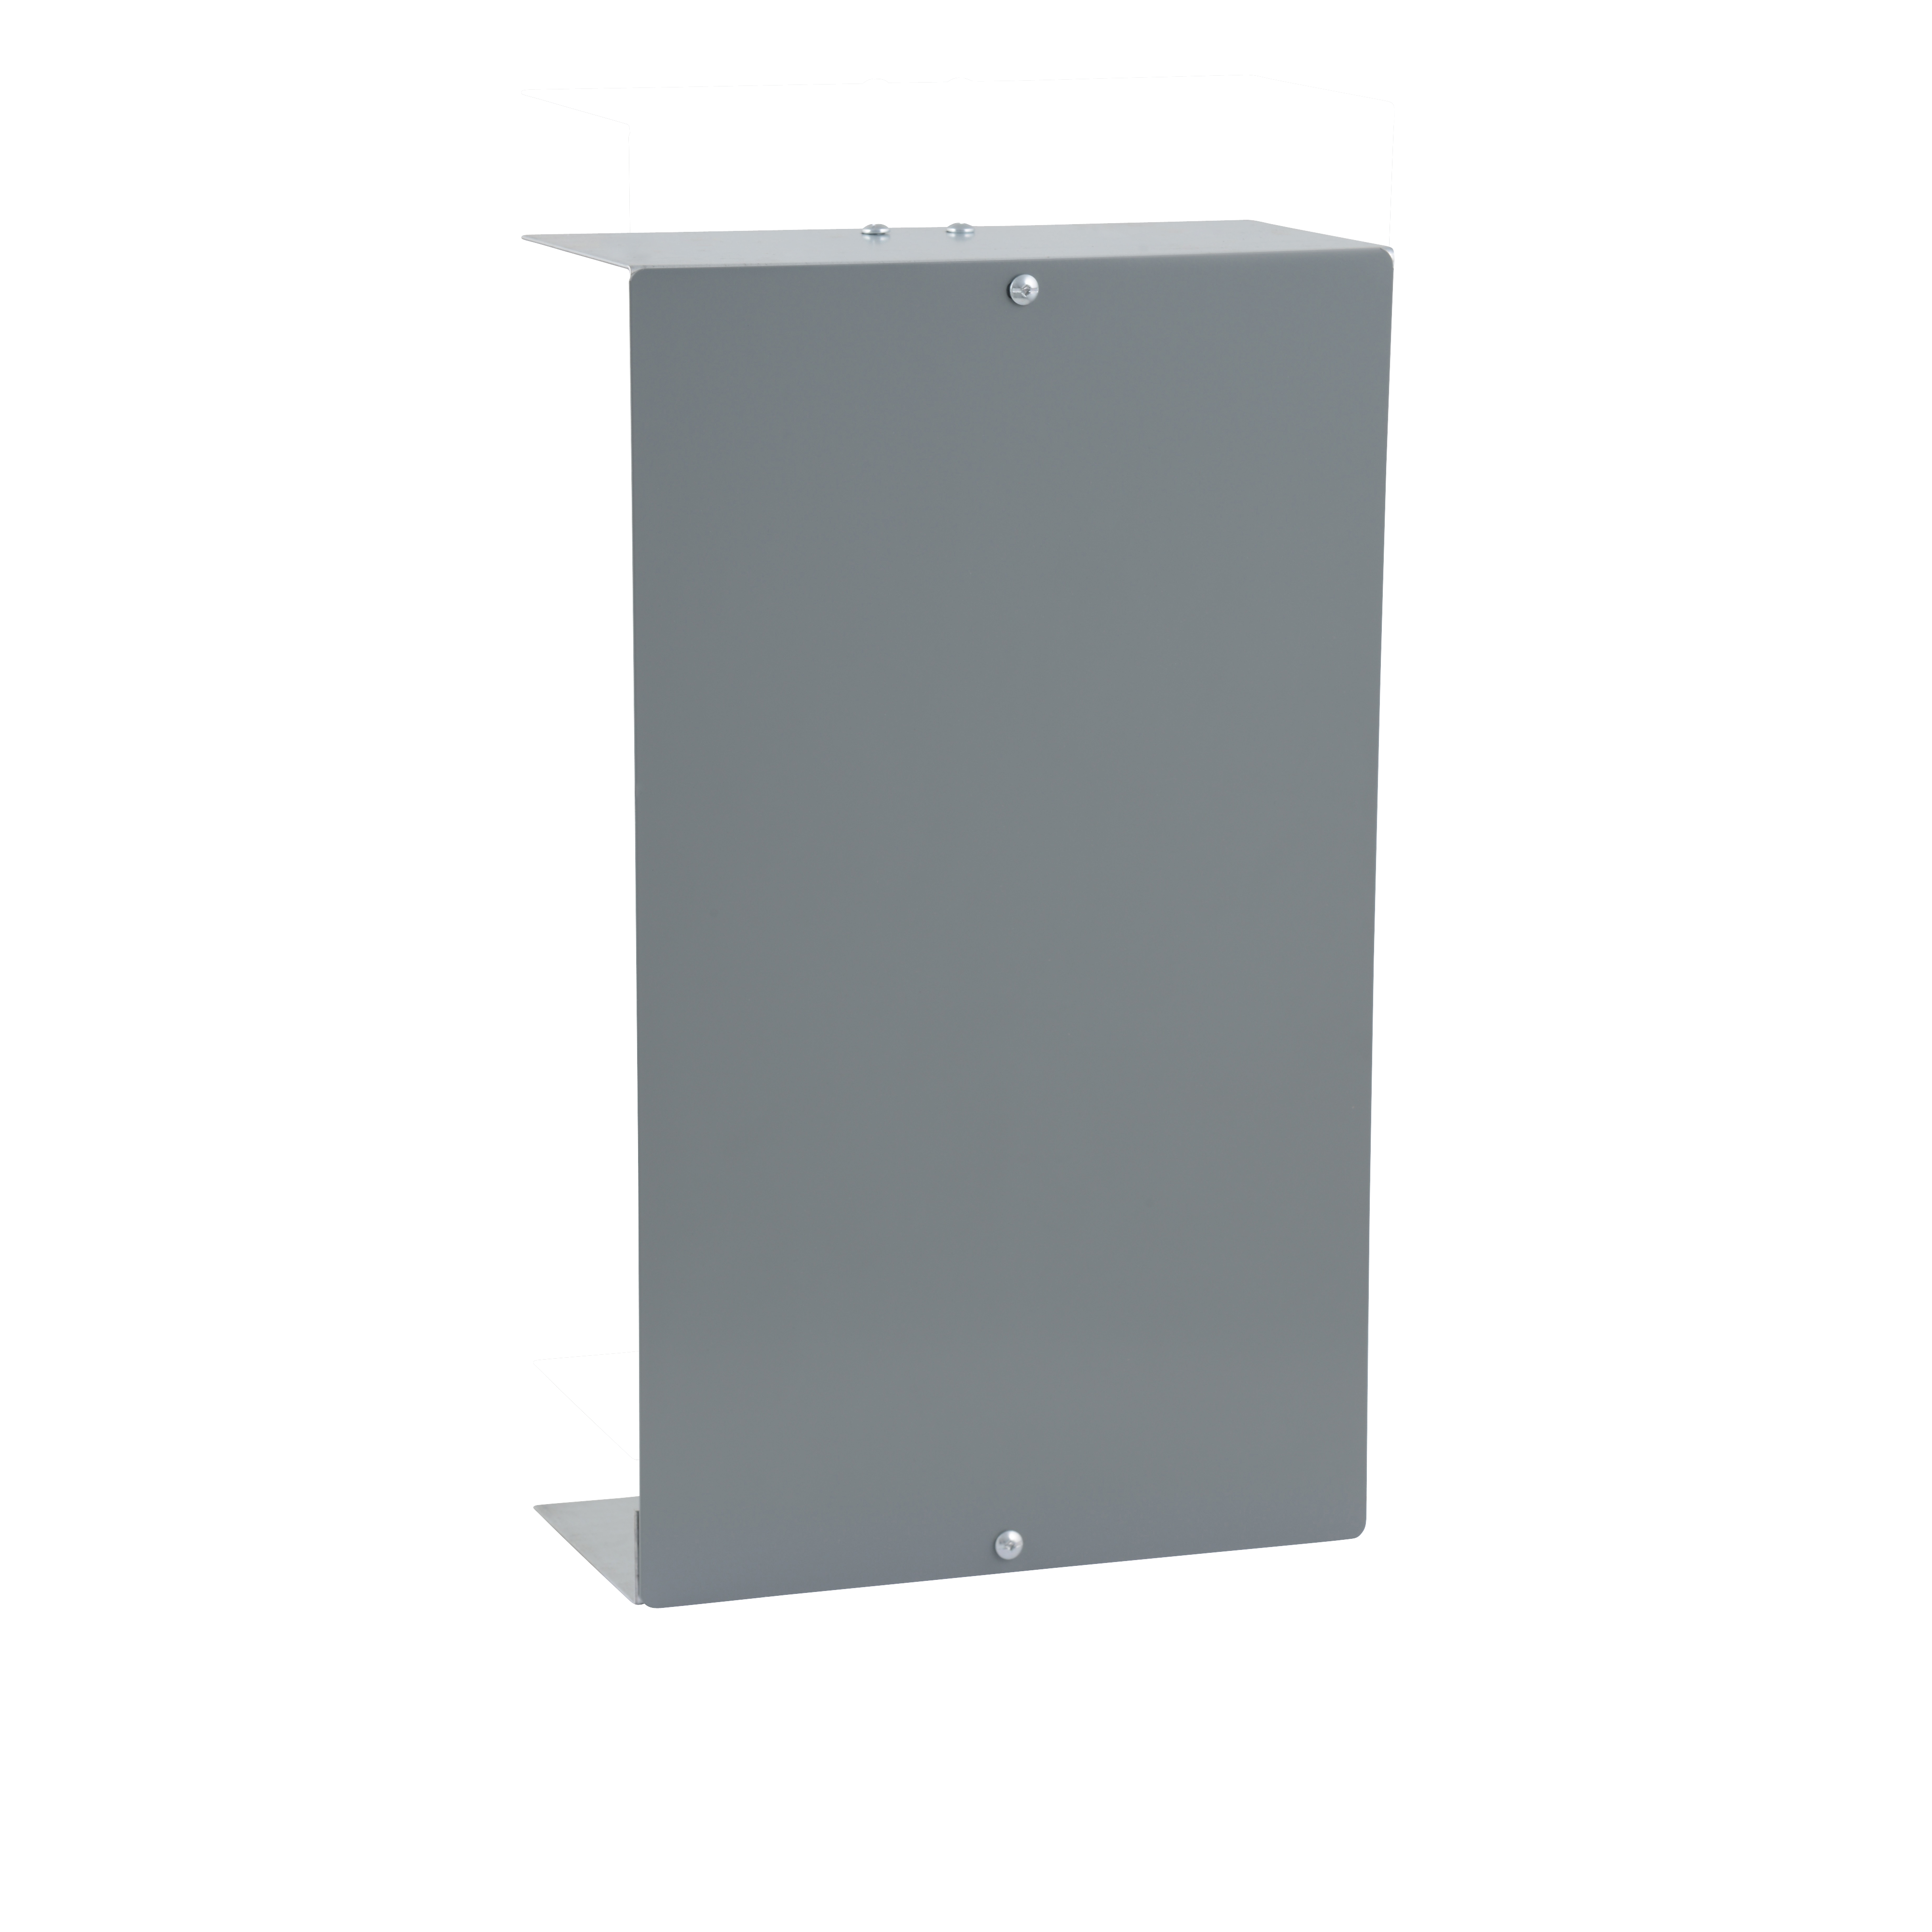 NQNF, enclosure panel skirt assembly, type 1, 20 x 12 x 5.75 in